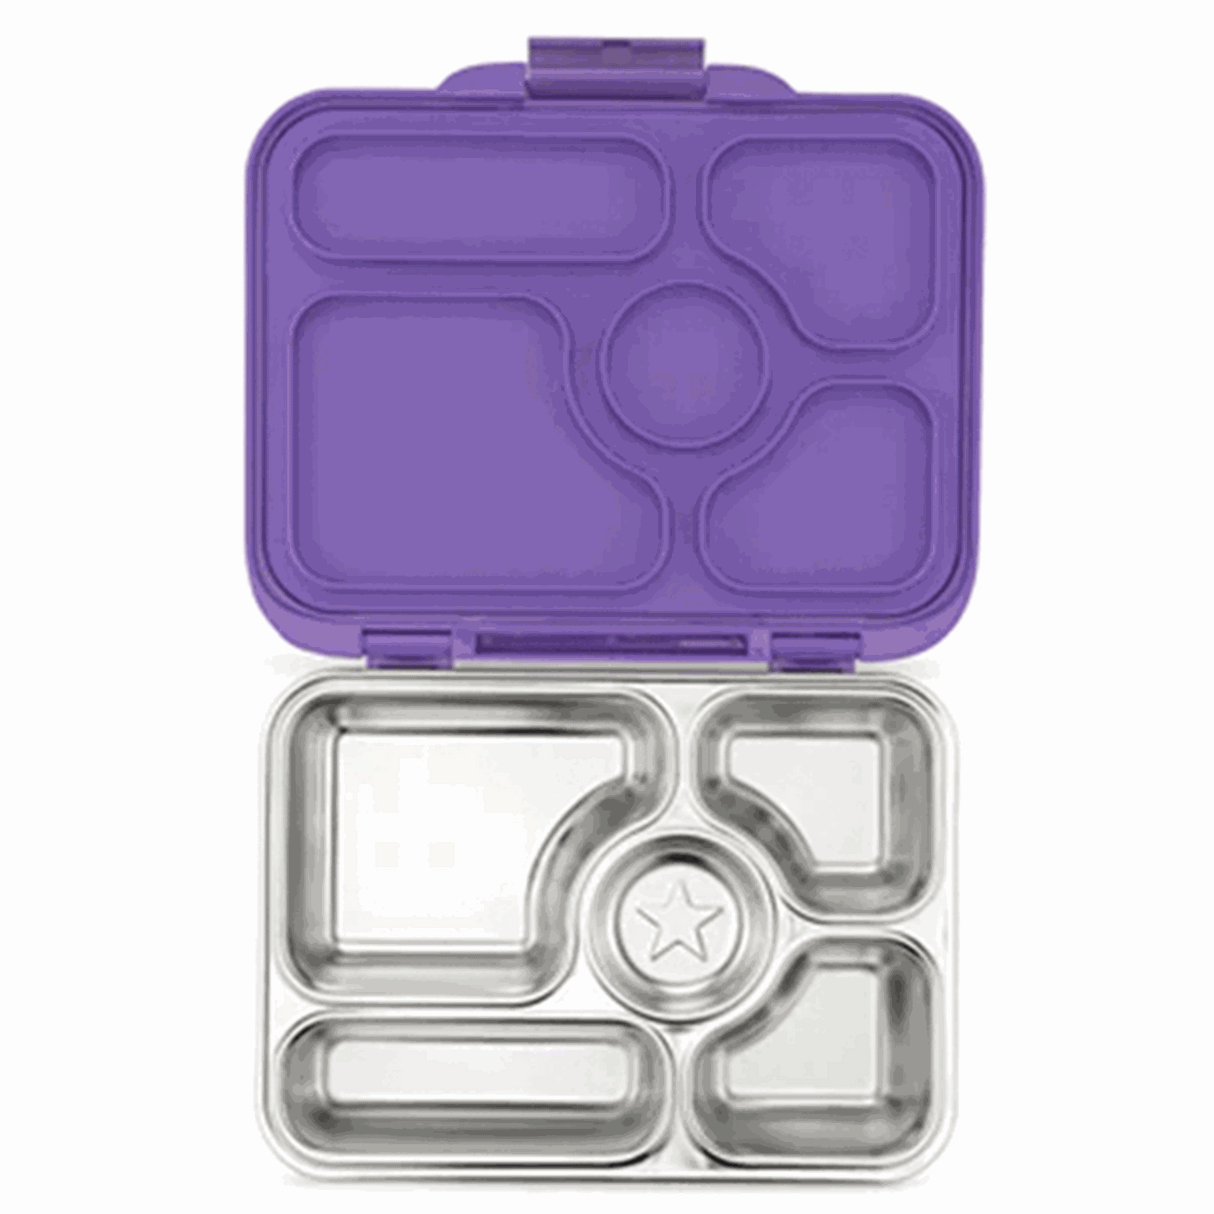 Yumbox Presto Stainless Steel Lunchlådor Remy Lavender 5